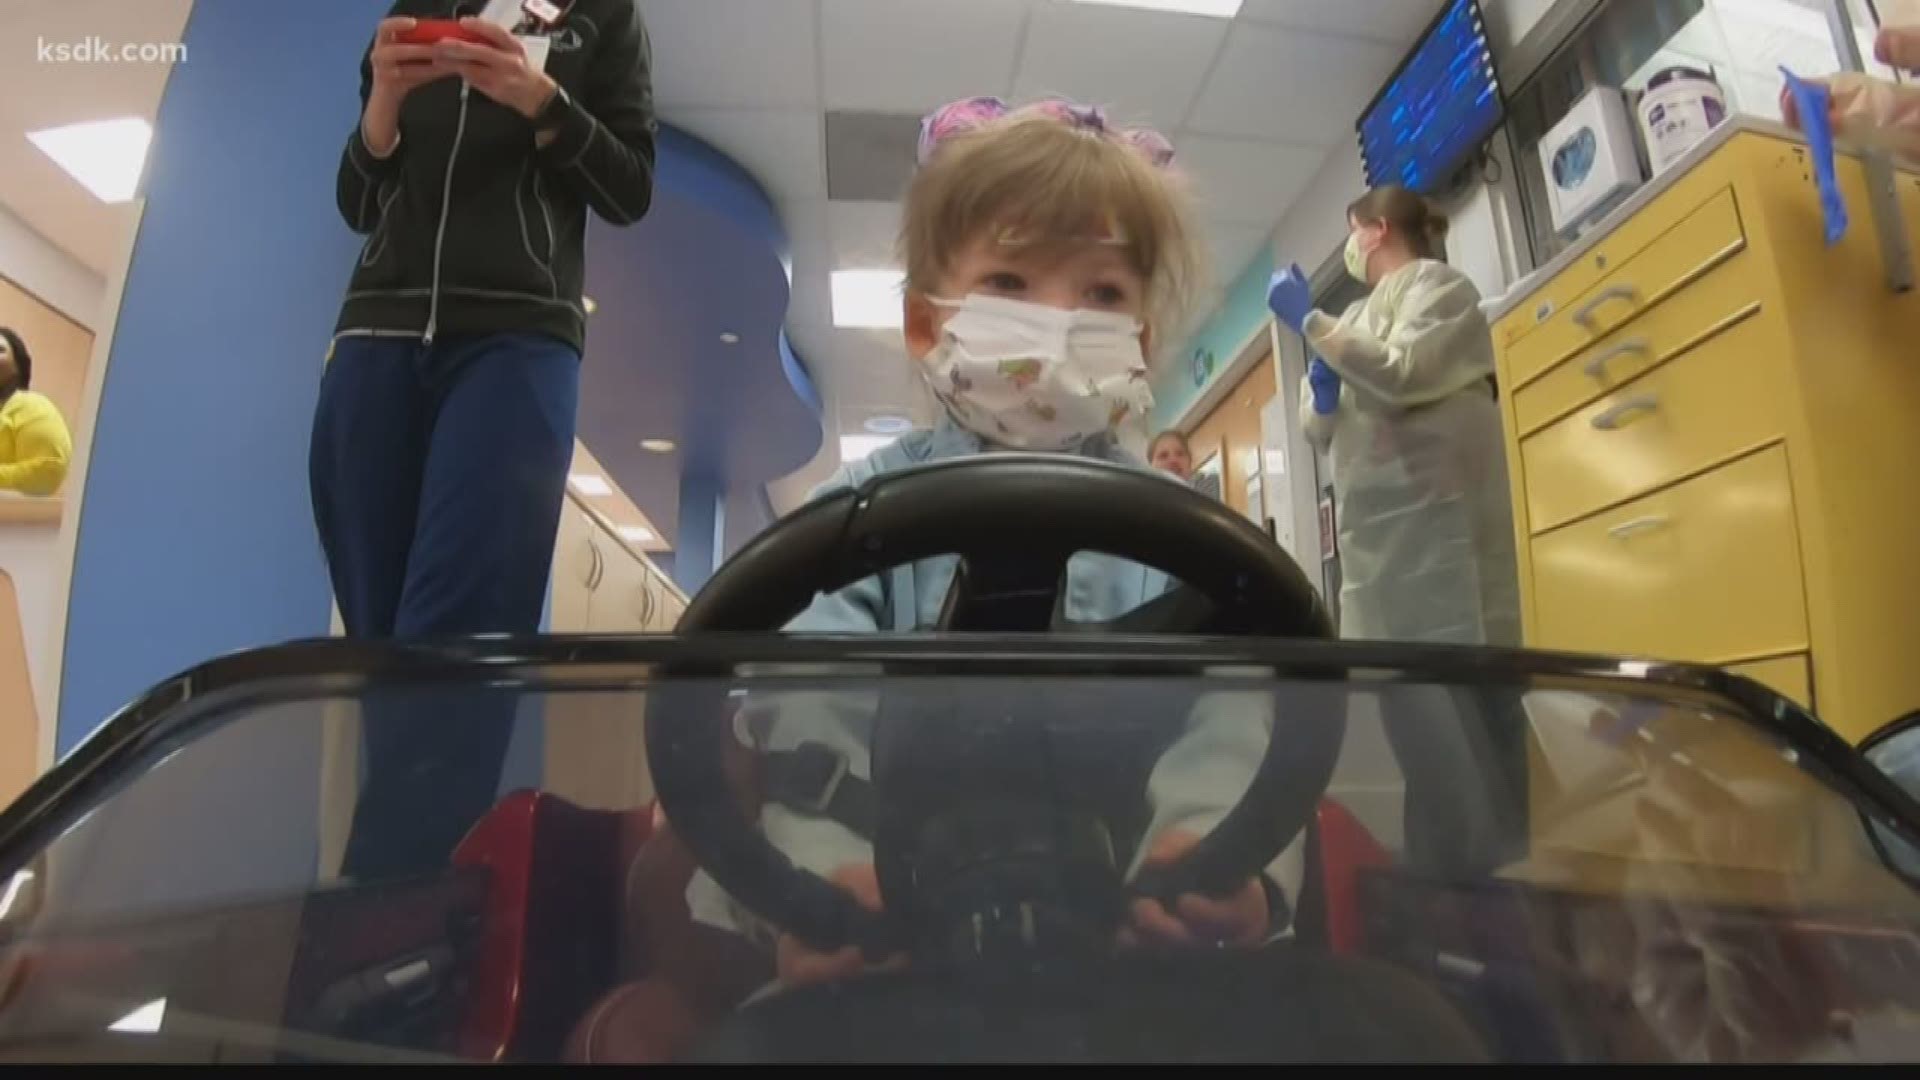 Patients like 4-year-old Ellie Bowman who had a heart and double lung transplant now travel to the O.R. in special remote-controlled cars.